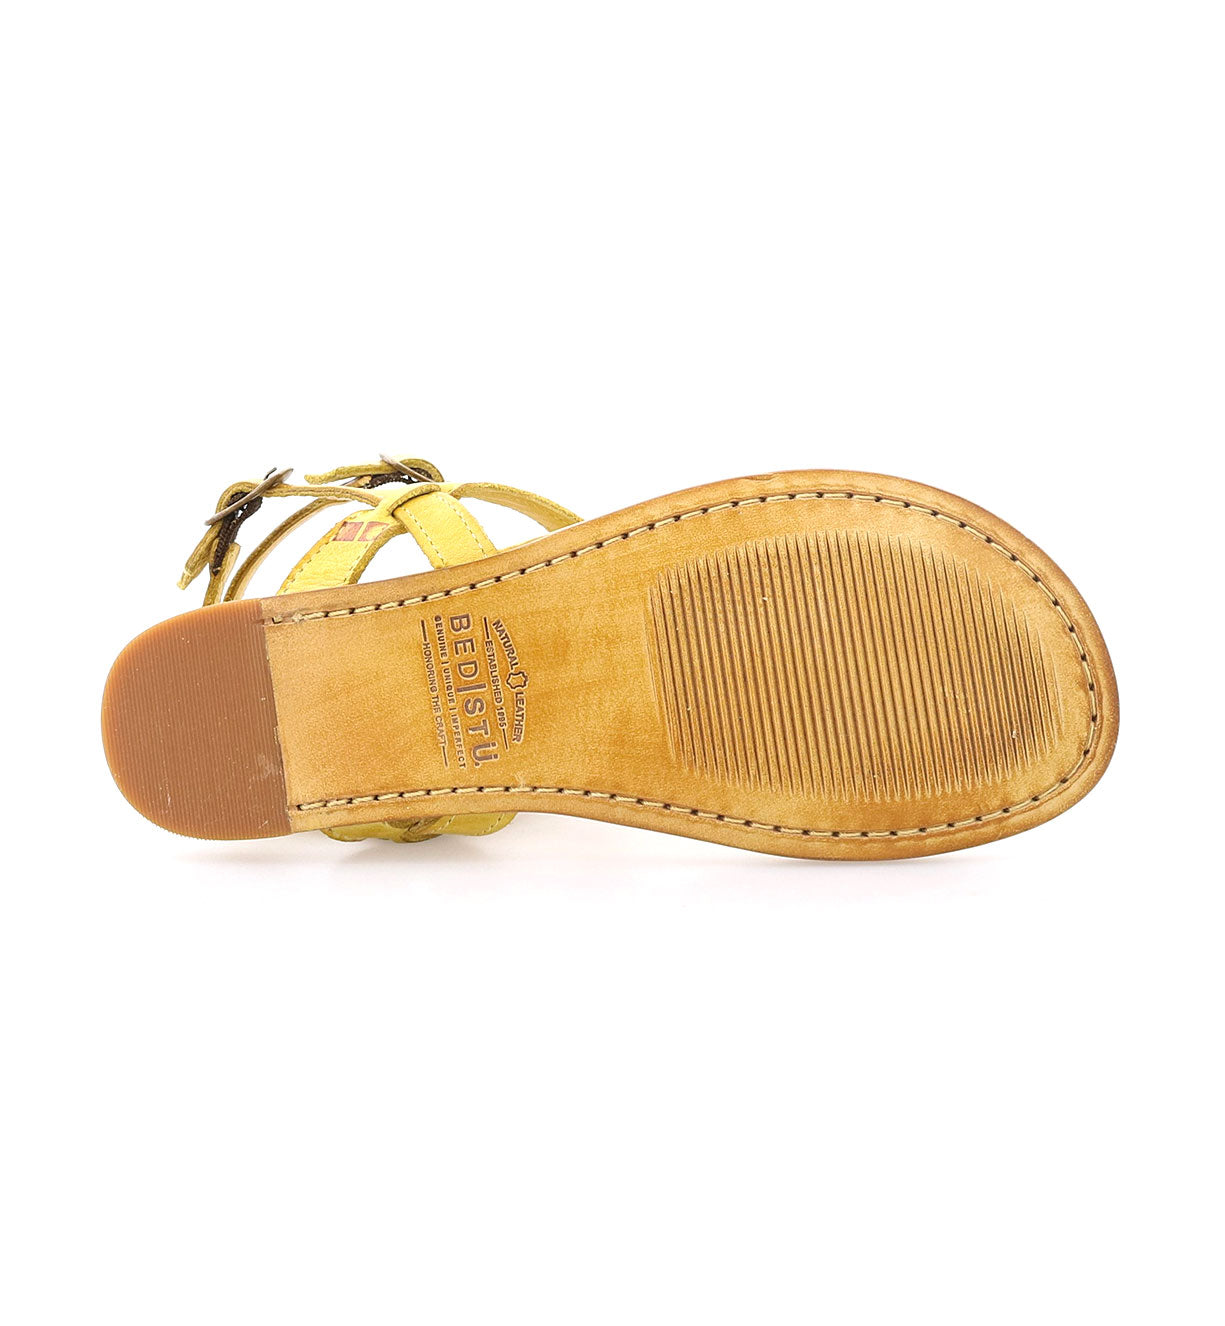 A pair of Moon yellow sandals on a white background by Bed Stu.